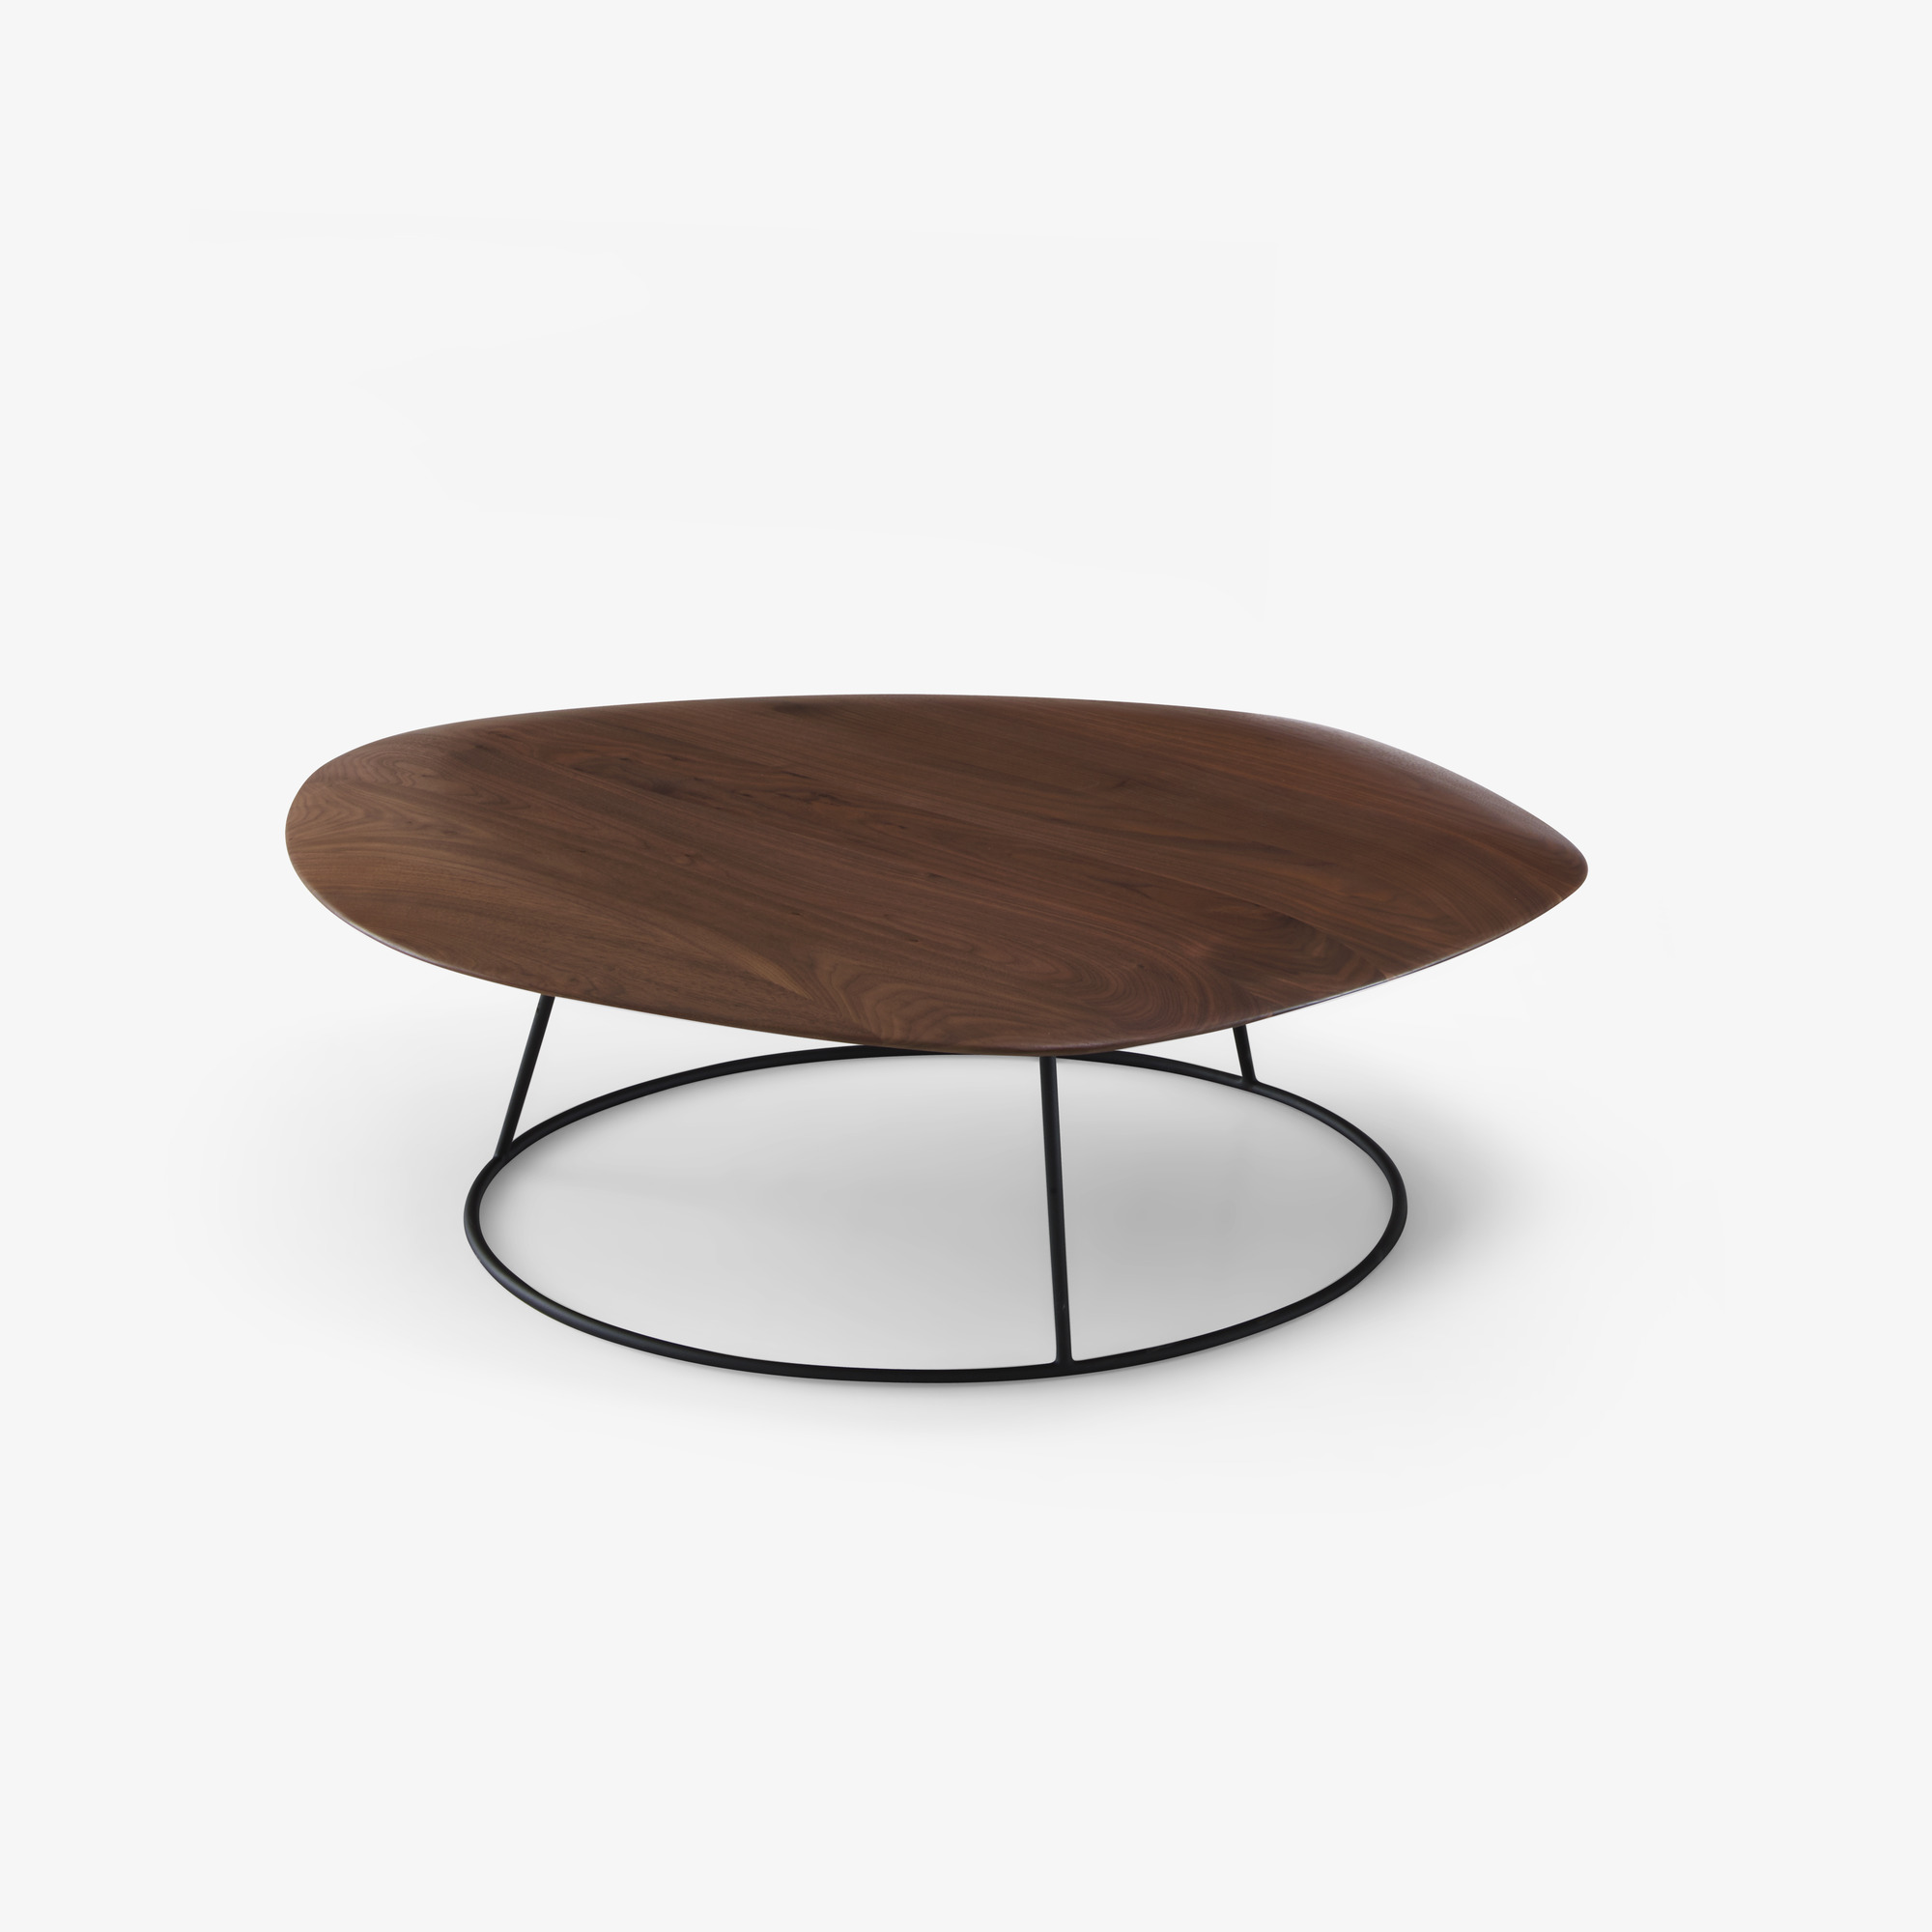 Image Low table convex top small 2